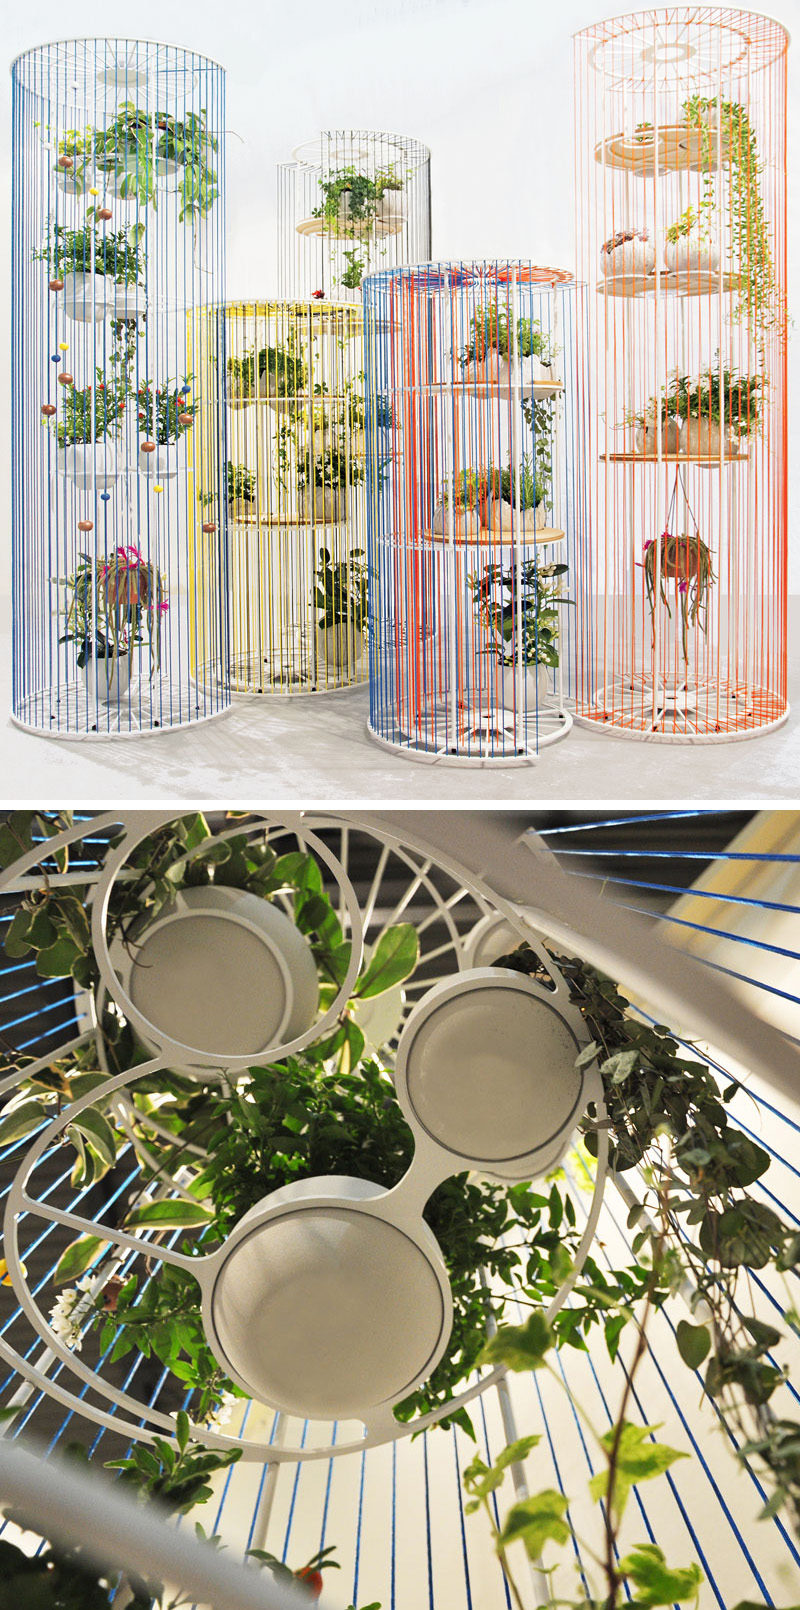 Designer Alessandra Meacci has created Bolina, a modern and versatile room divider, that doubles as a bookshelf and a place to display your plants.